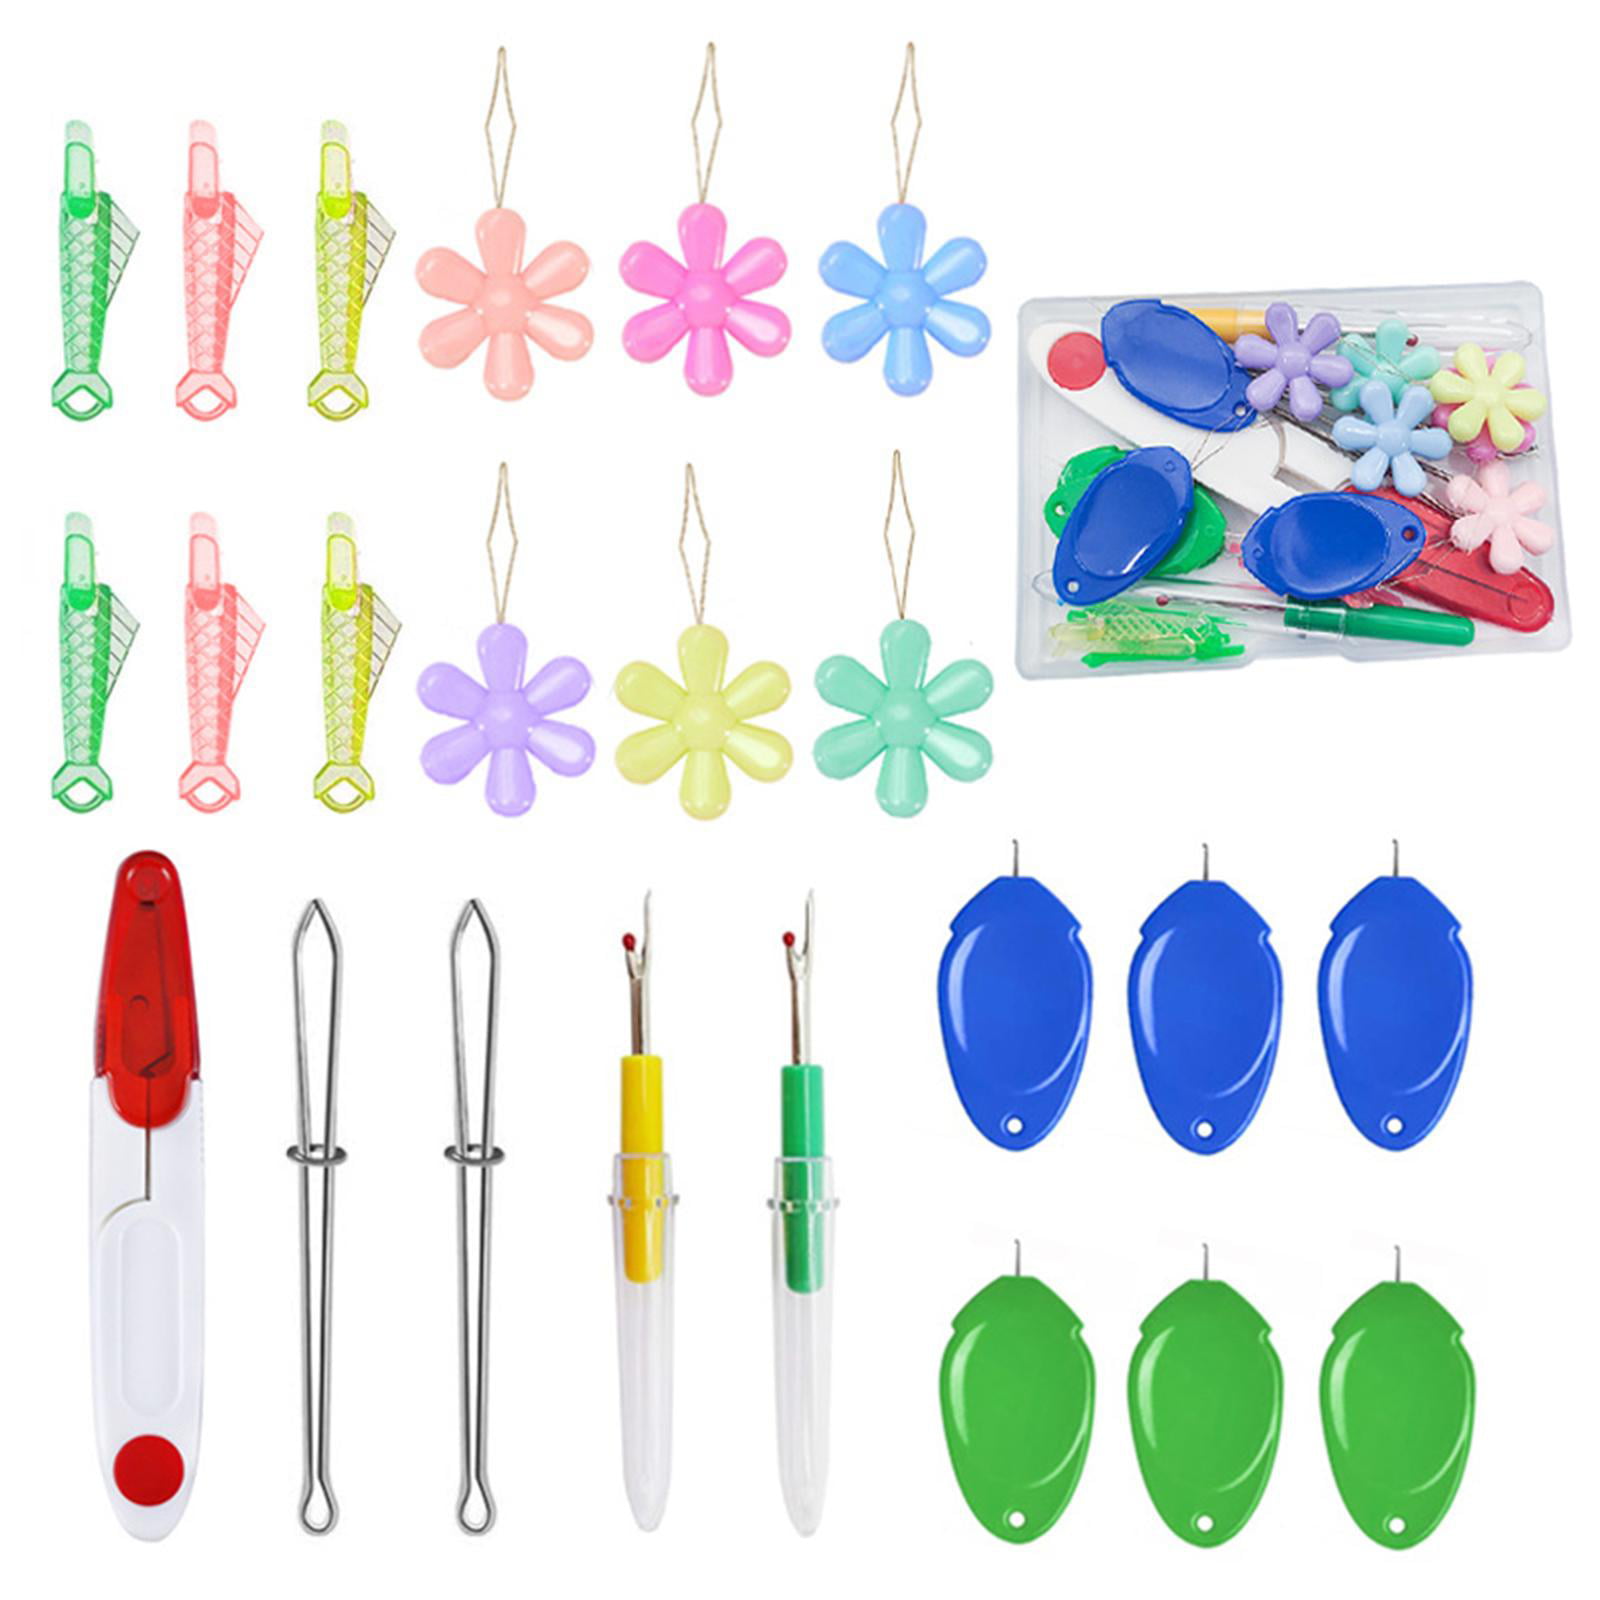 Needle Threaders for Hand Sewing,25 Pcs Needle Threaders Kit,Include Fish  Type Easy Threader/Gourd Shaped Sewing Needle Threader/Thumb Shaped